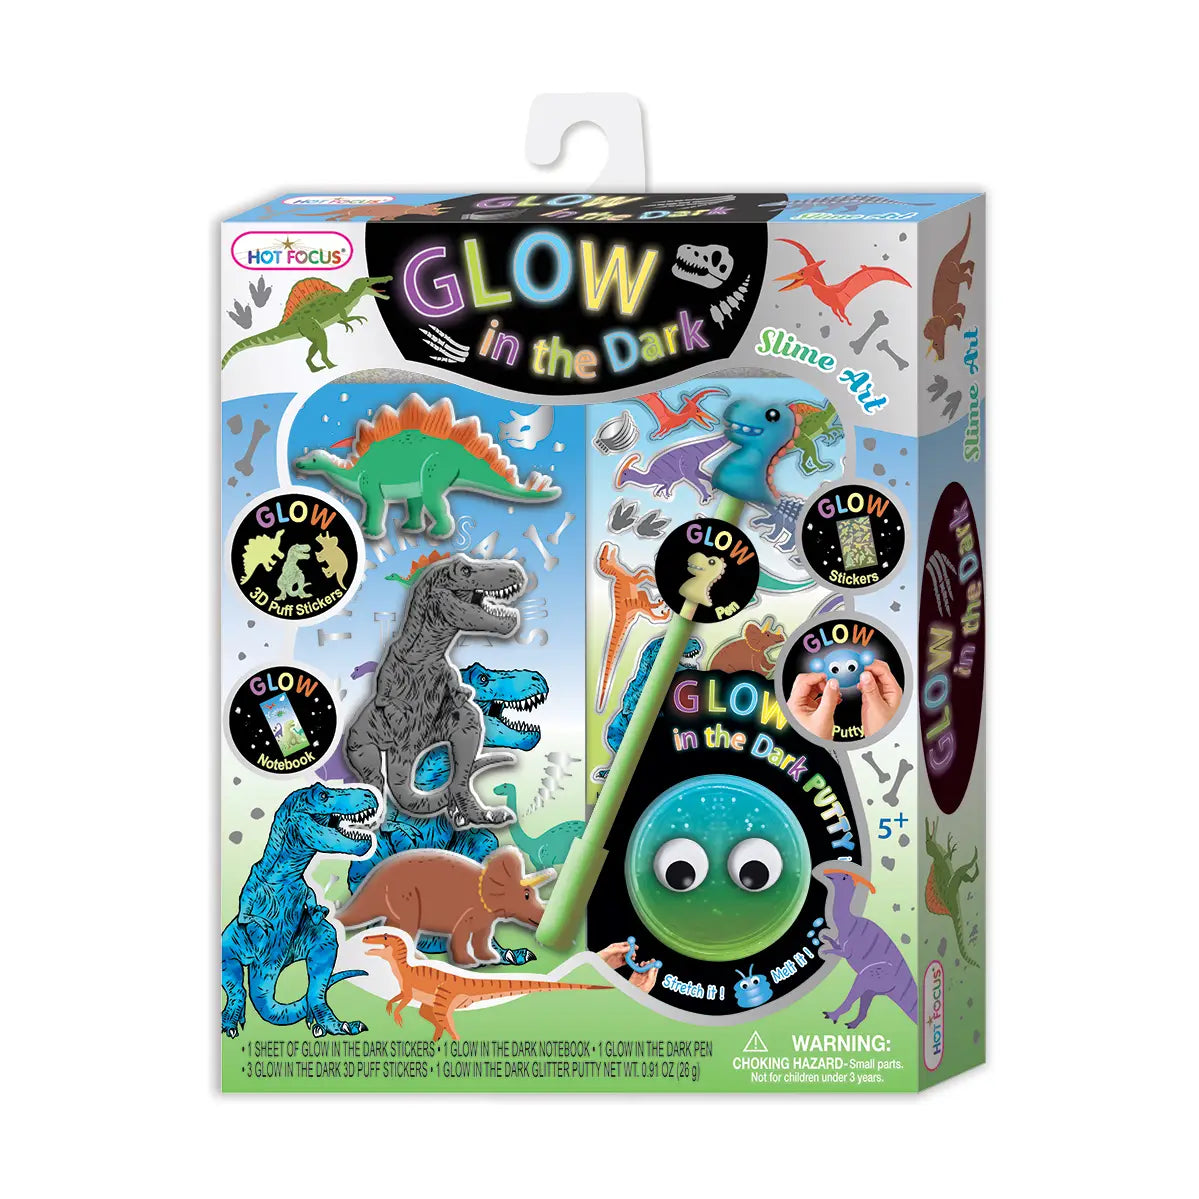 Previously ordered Glow in the Dark Slime Art,Dinosaur